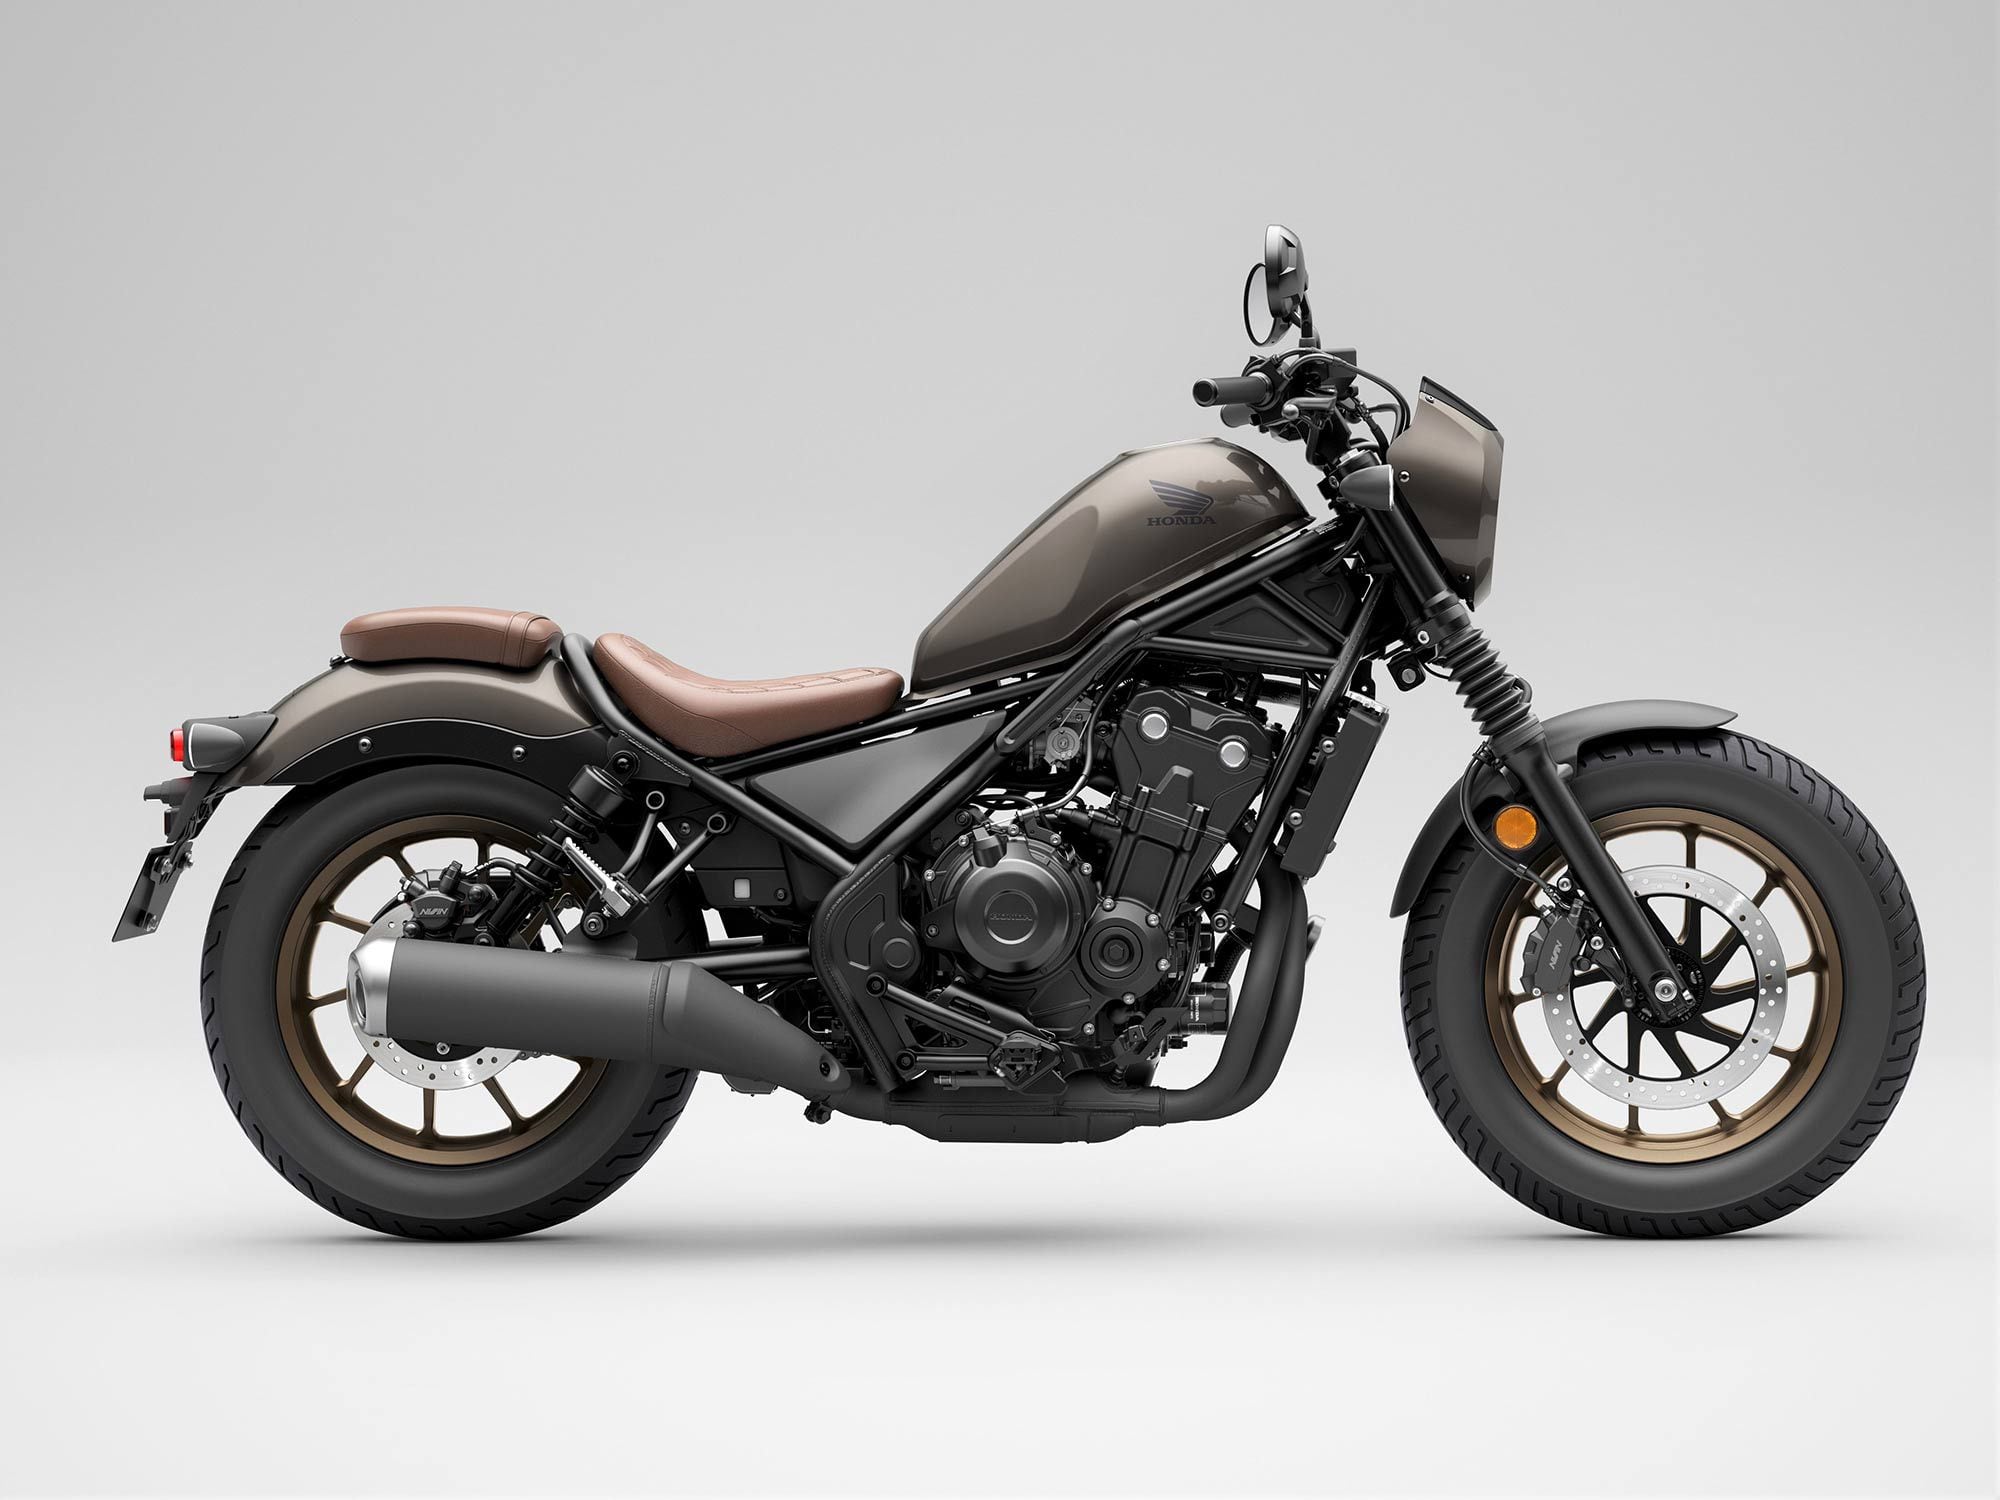 Honda is bringing the Rebel 500 (CMX500 in Europe) back to European markets for 2023.